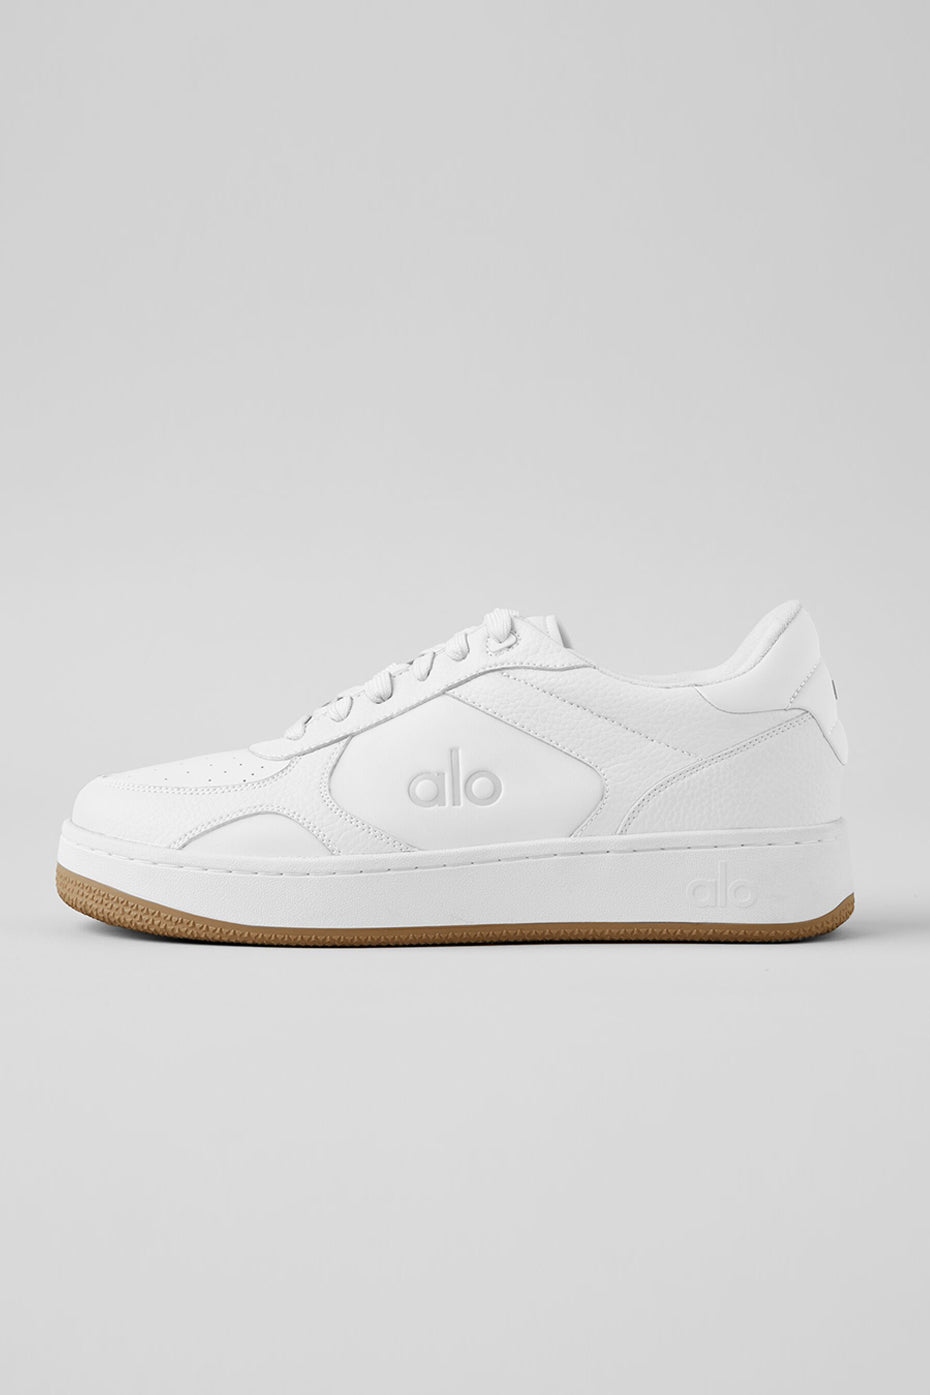 Alo Recovery Mode Sneaker - Natural White/Gum